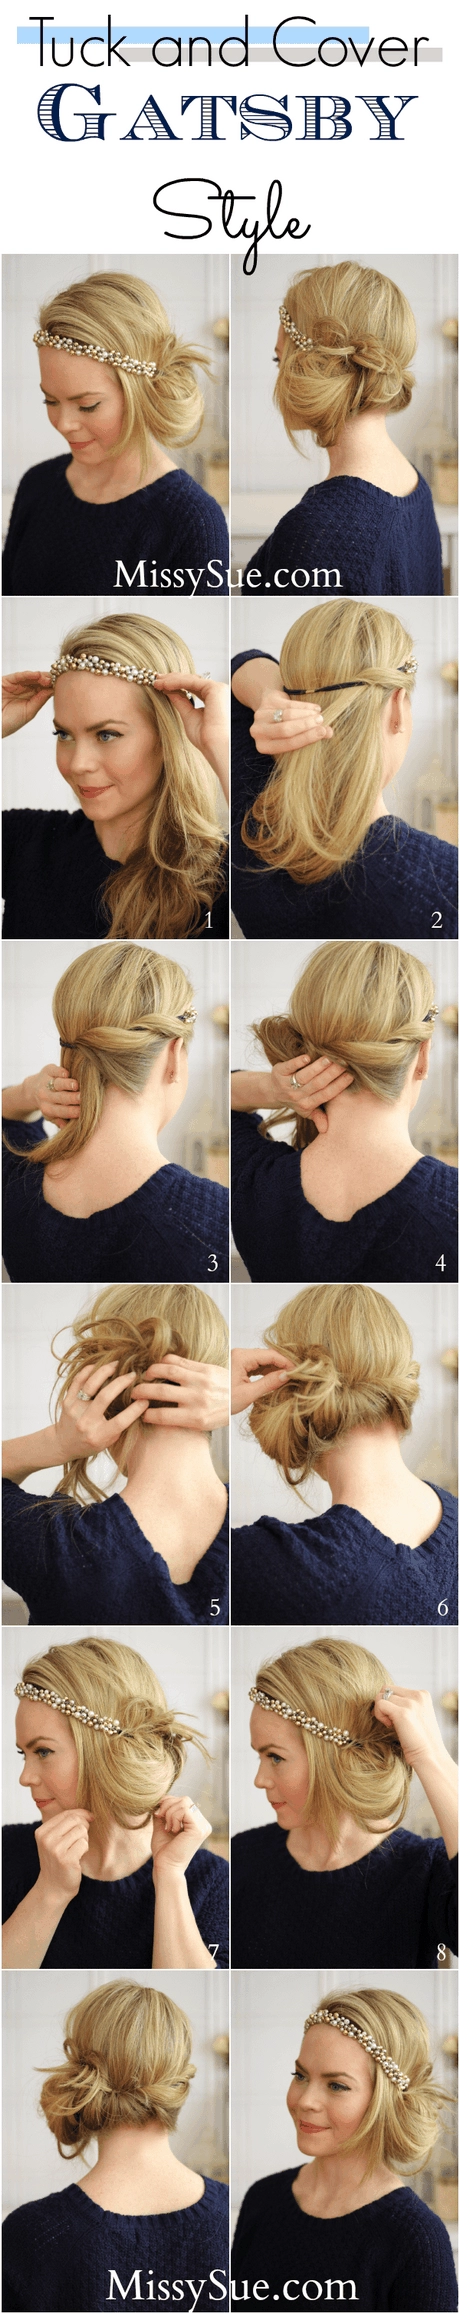 20s updo hairstyles 20s-updo-hairstyles-70_2-12-12